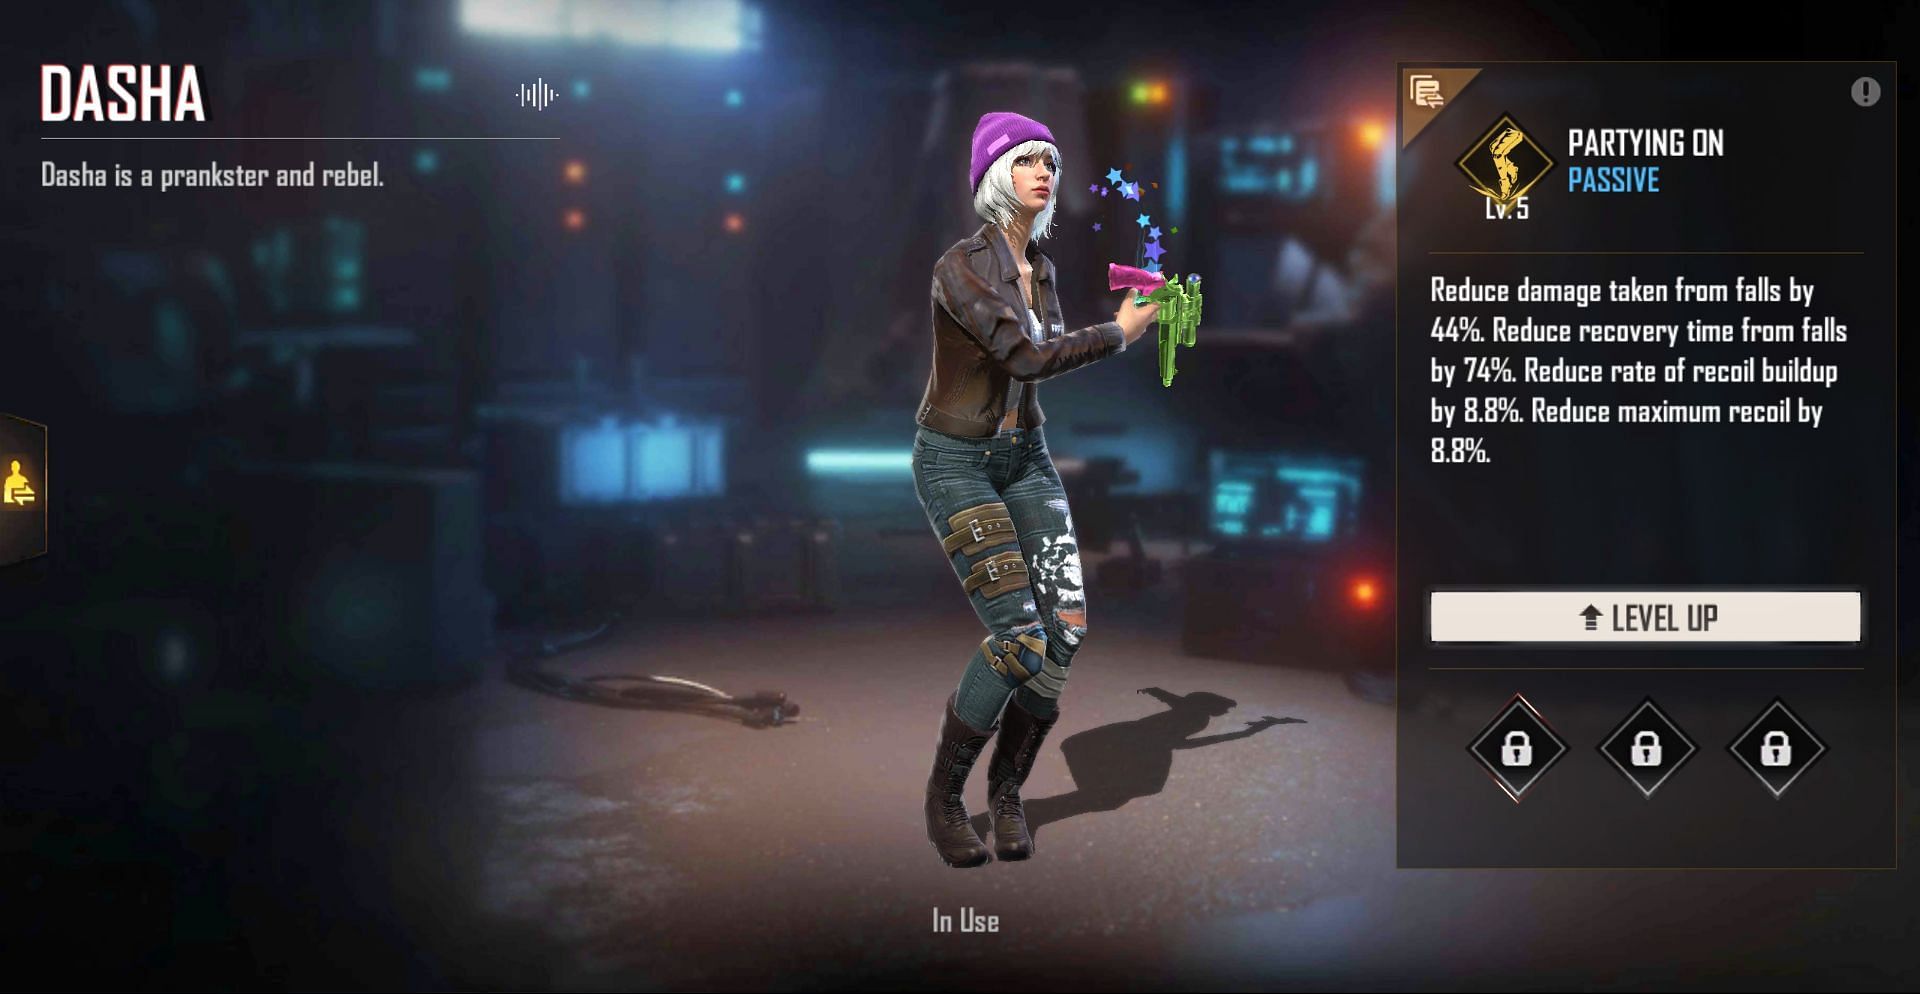 Dasha has the Partying On ability (Image via Free Fire)